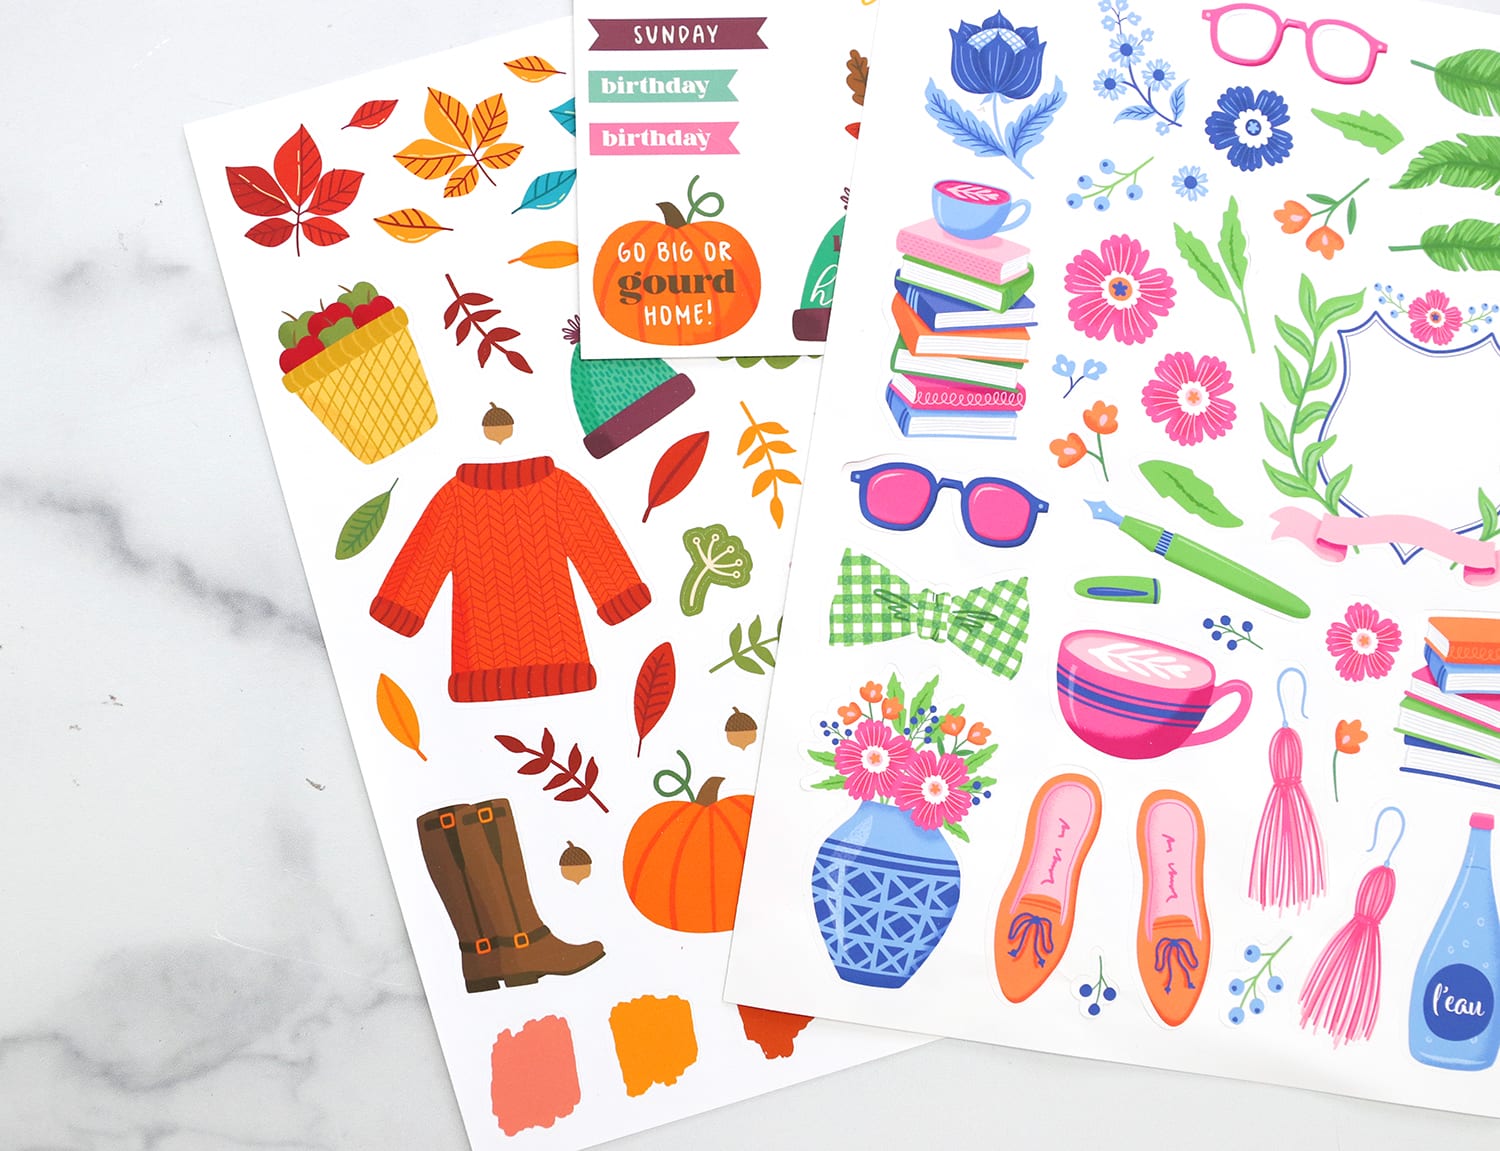 the-best-printable-sticker-paper-for-your-diy-stickers-yay-day-paper